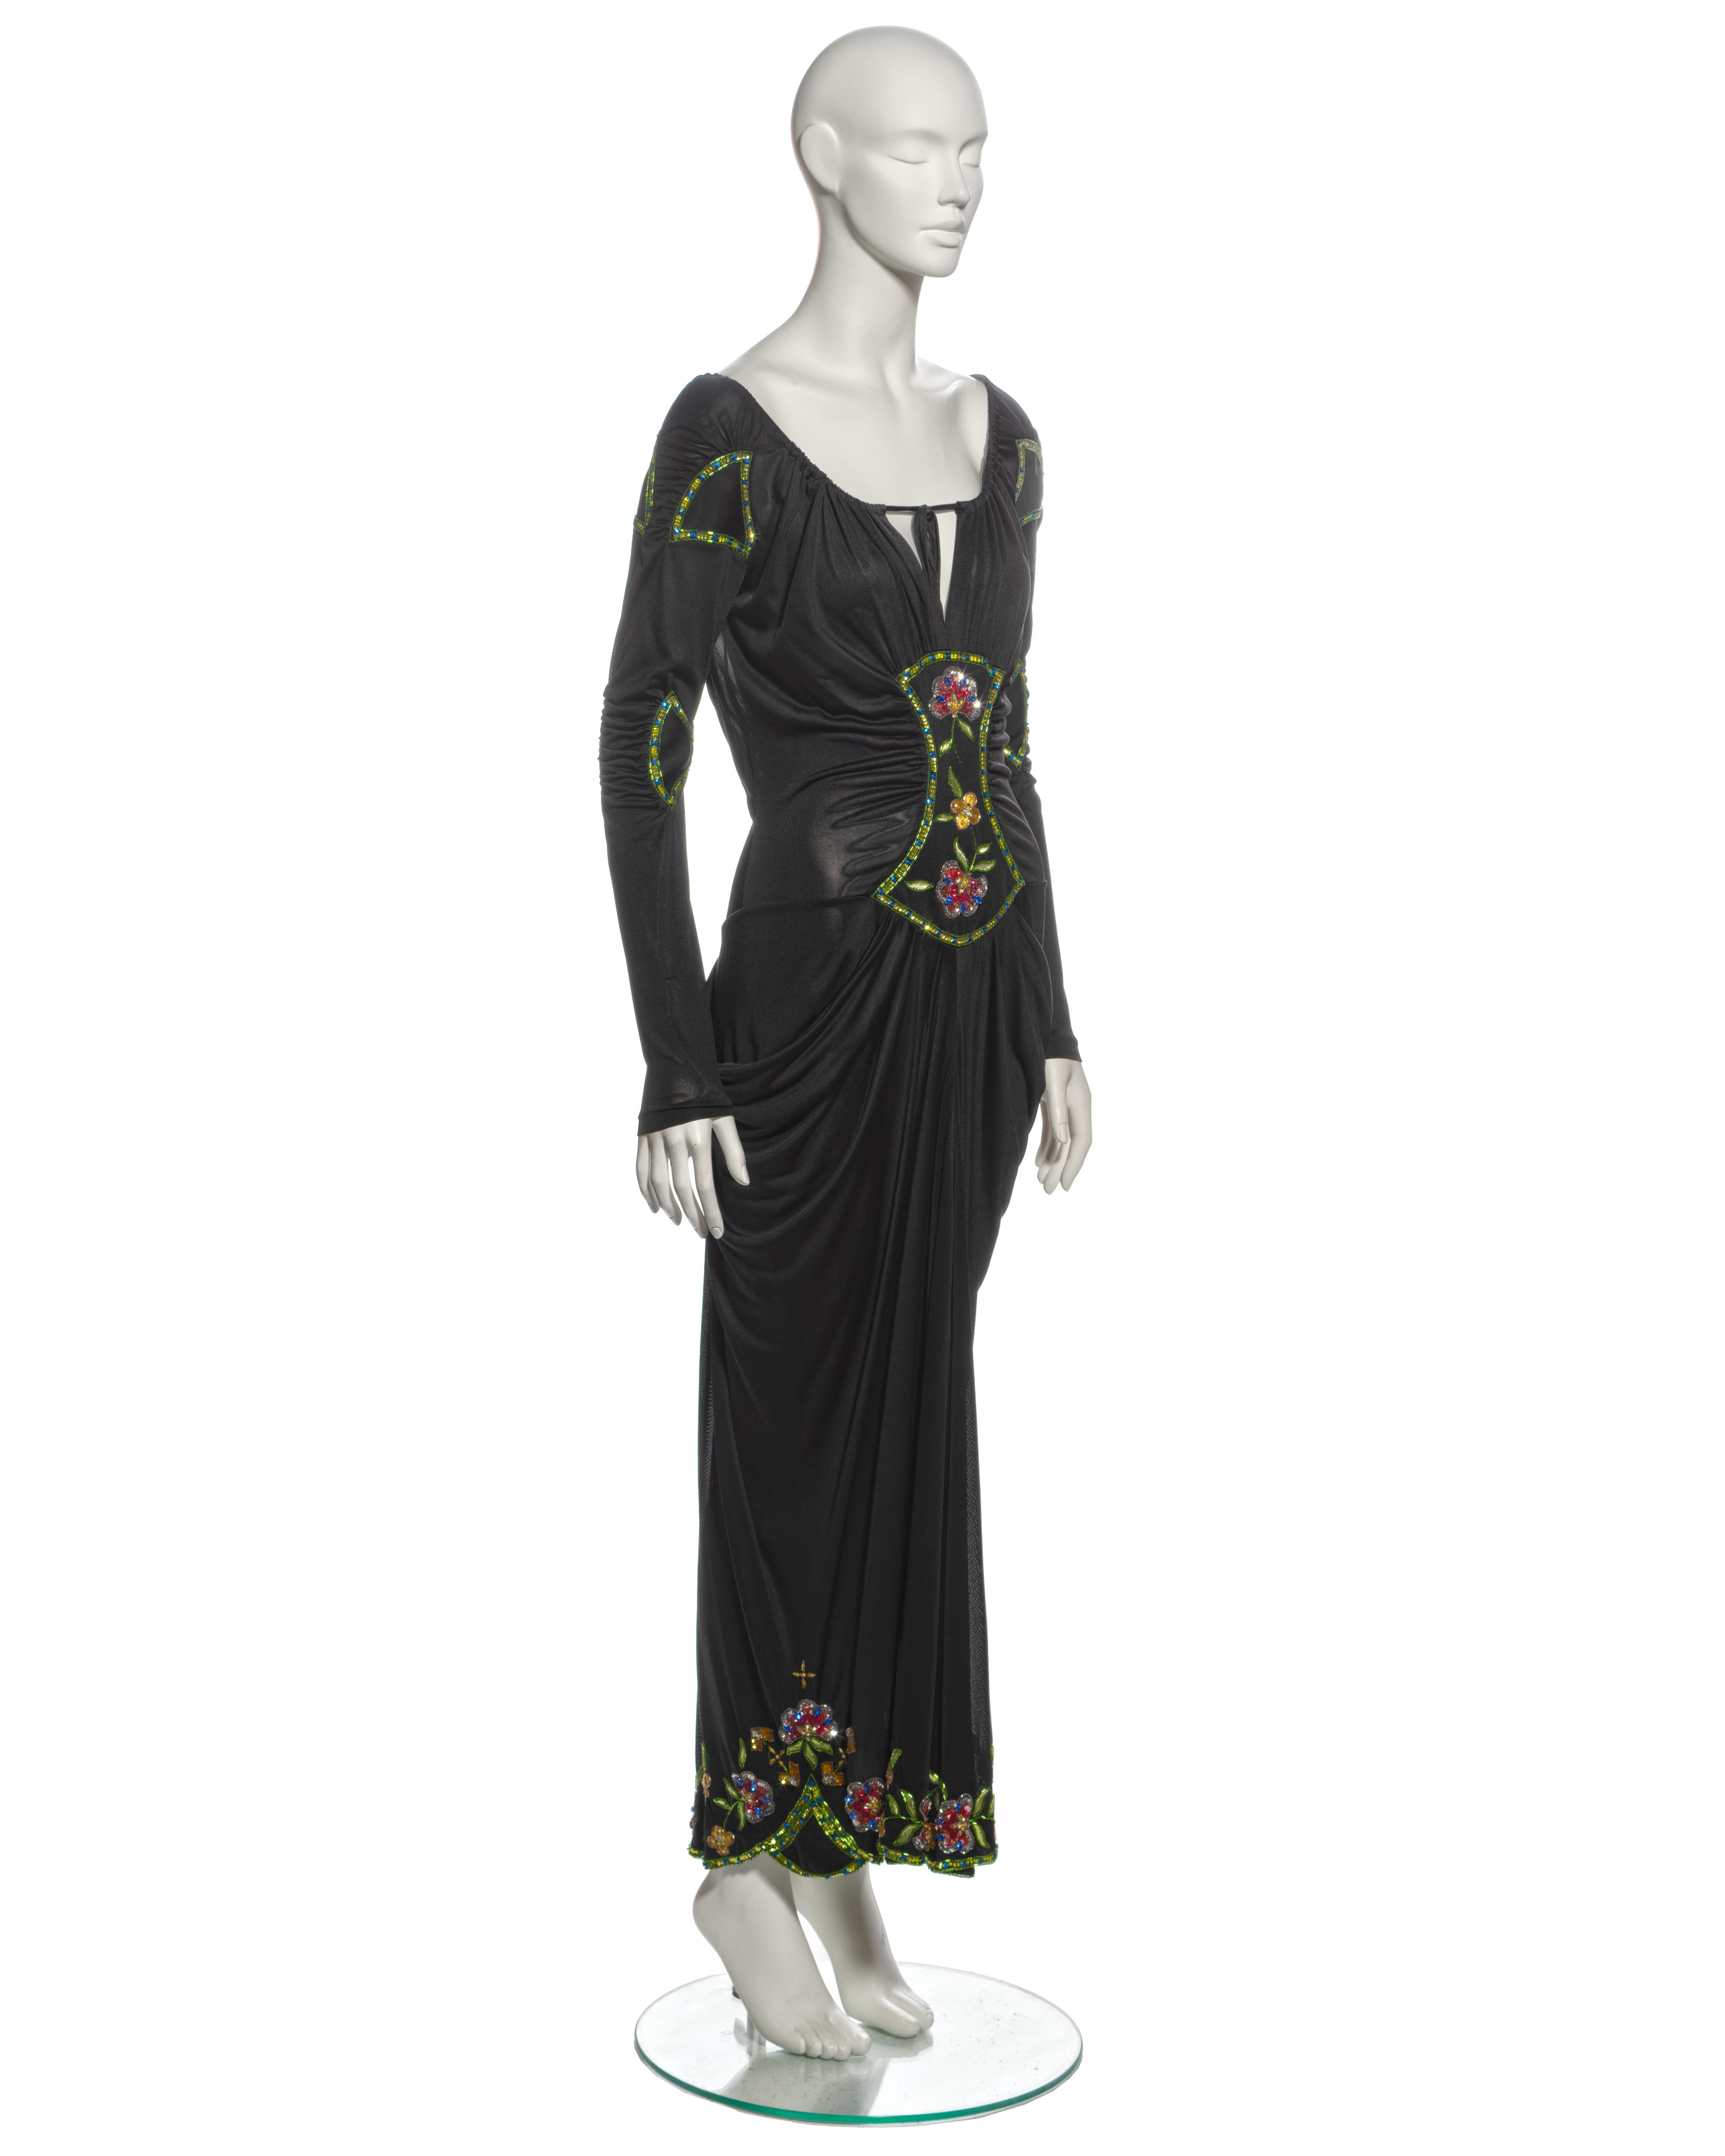 Christian Dior by John Galliano Black Viscose Embellished Draped Dress, ss 2002 For Sale 4